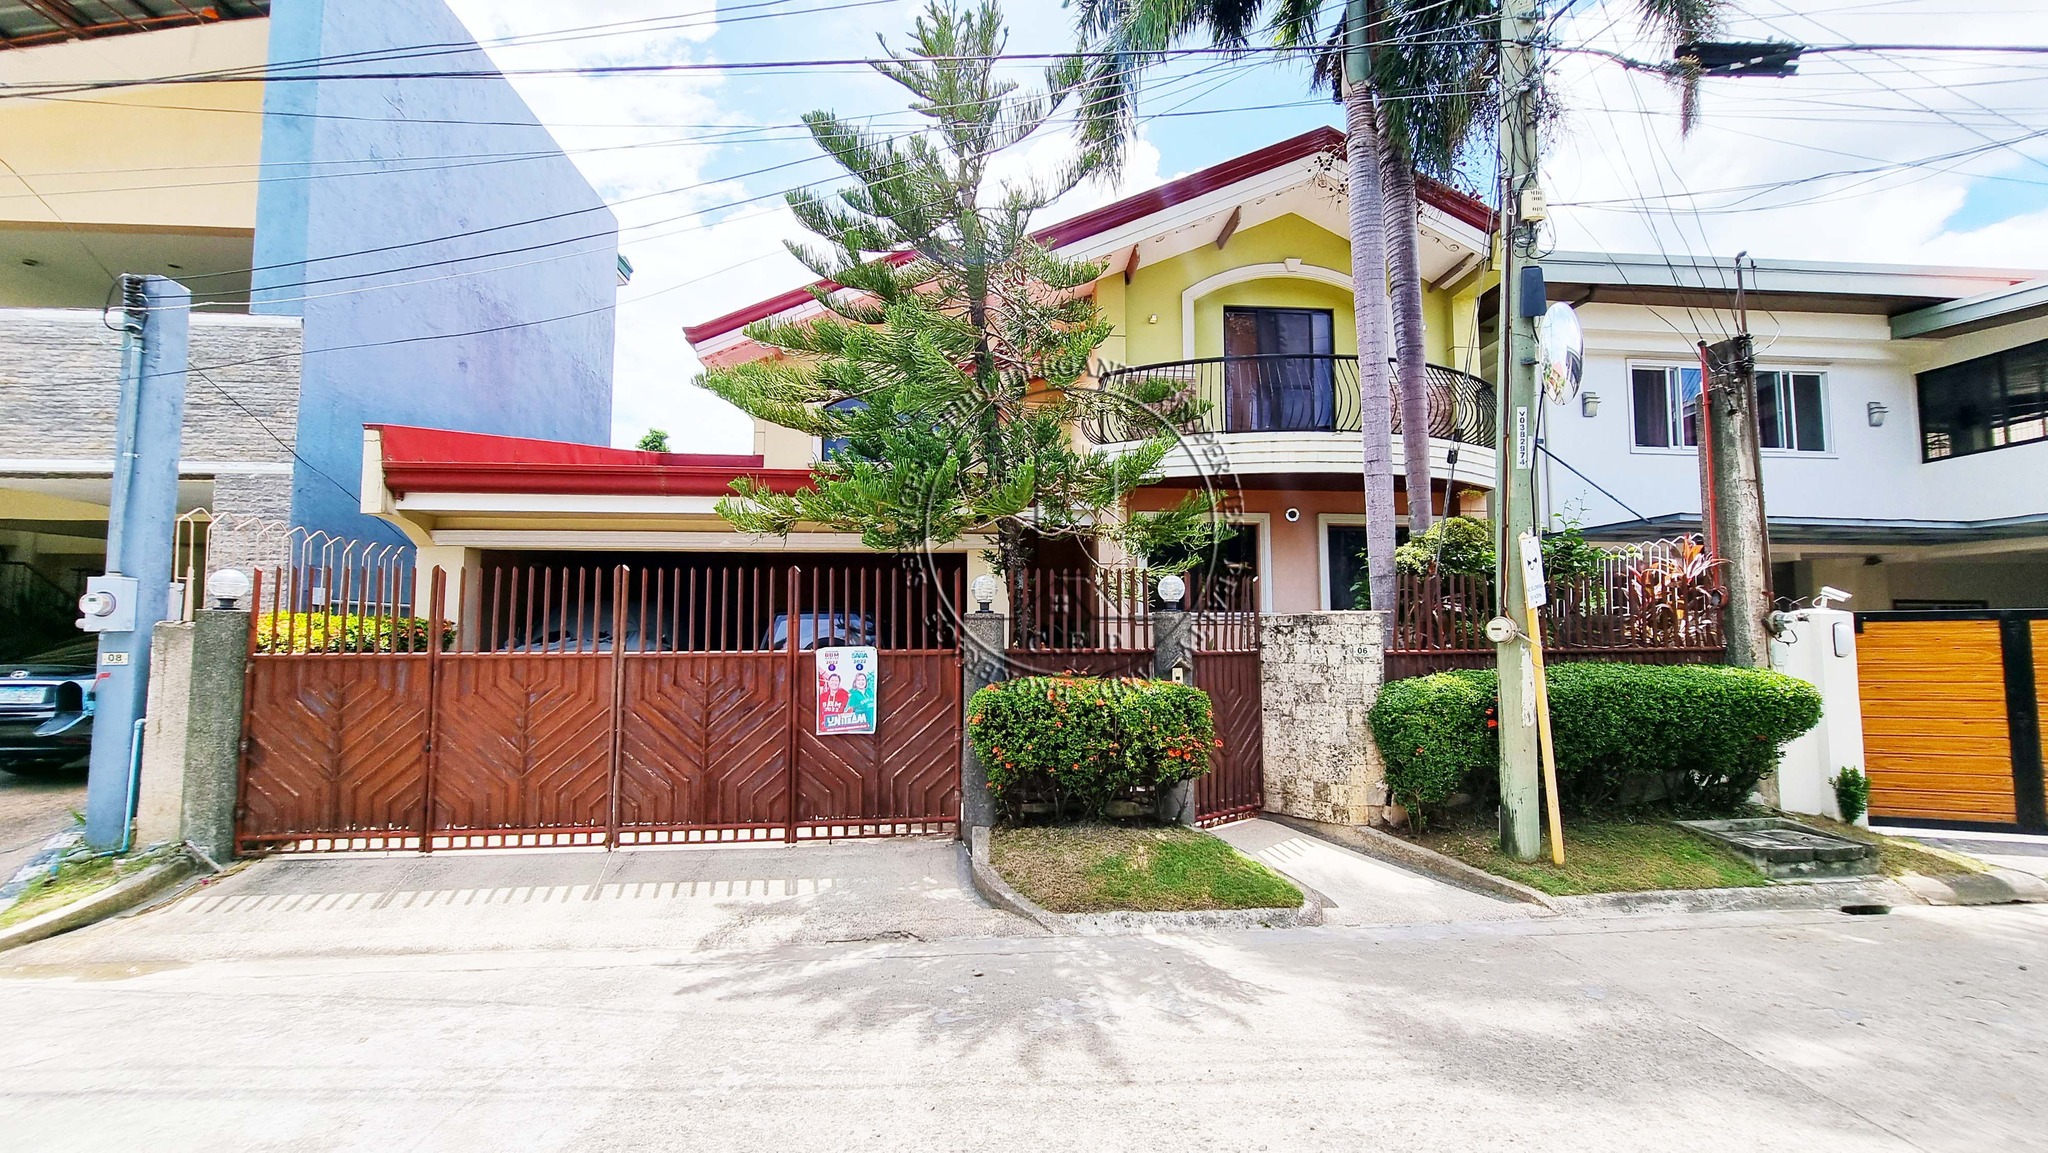 3 Bedroom Mediterranean House and Lot For Sale in Banilad